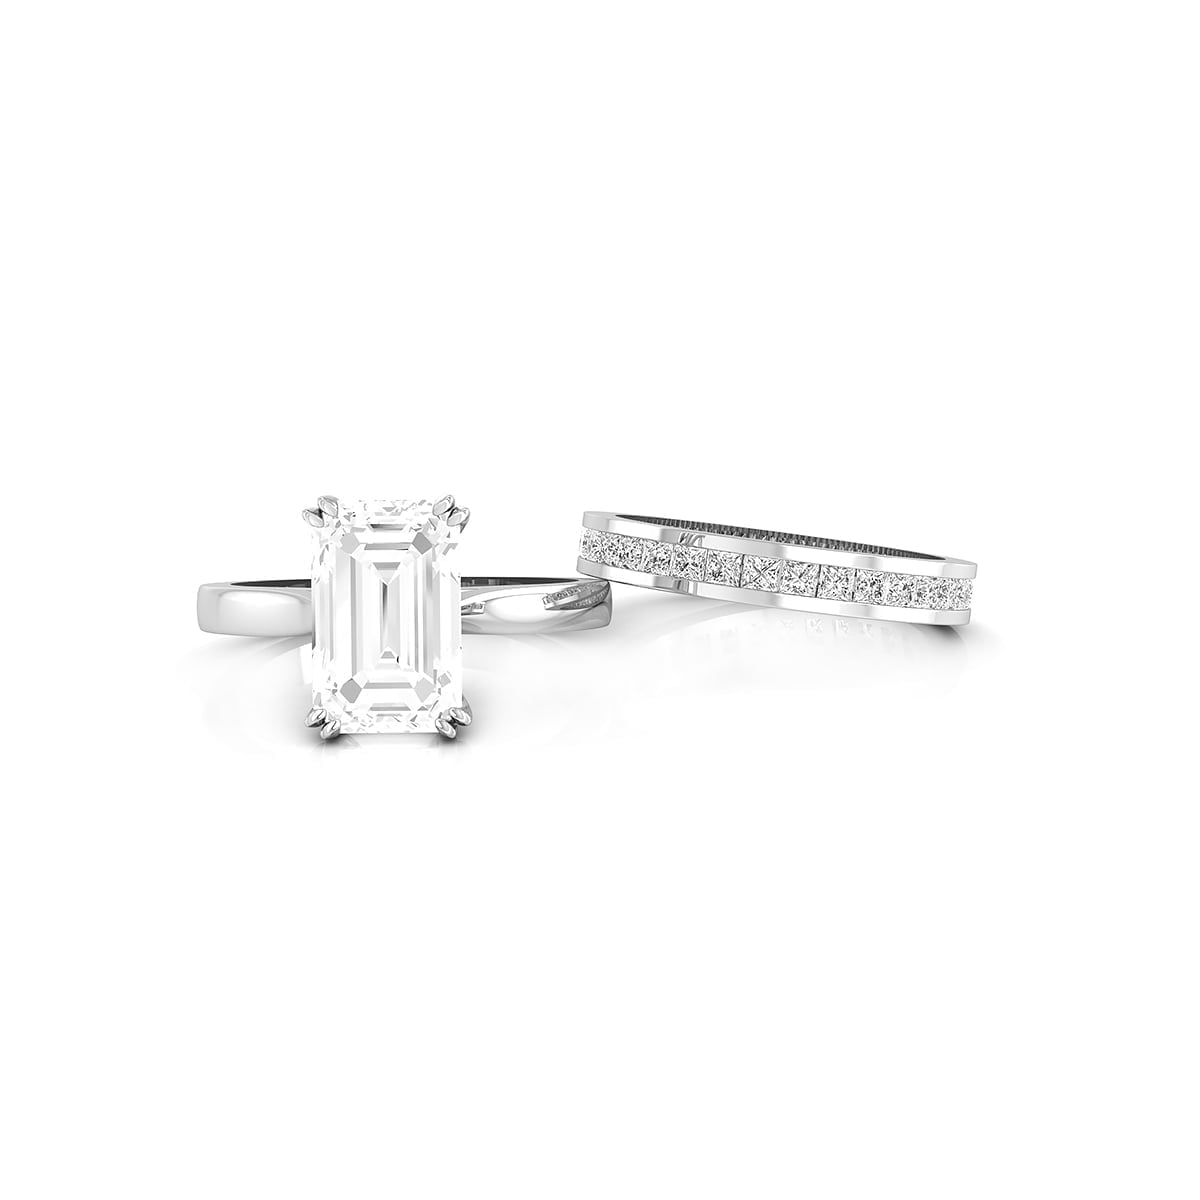 Emerald Or Princess Cut CZ Stone Solitaire Wedding Ring Set For Women